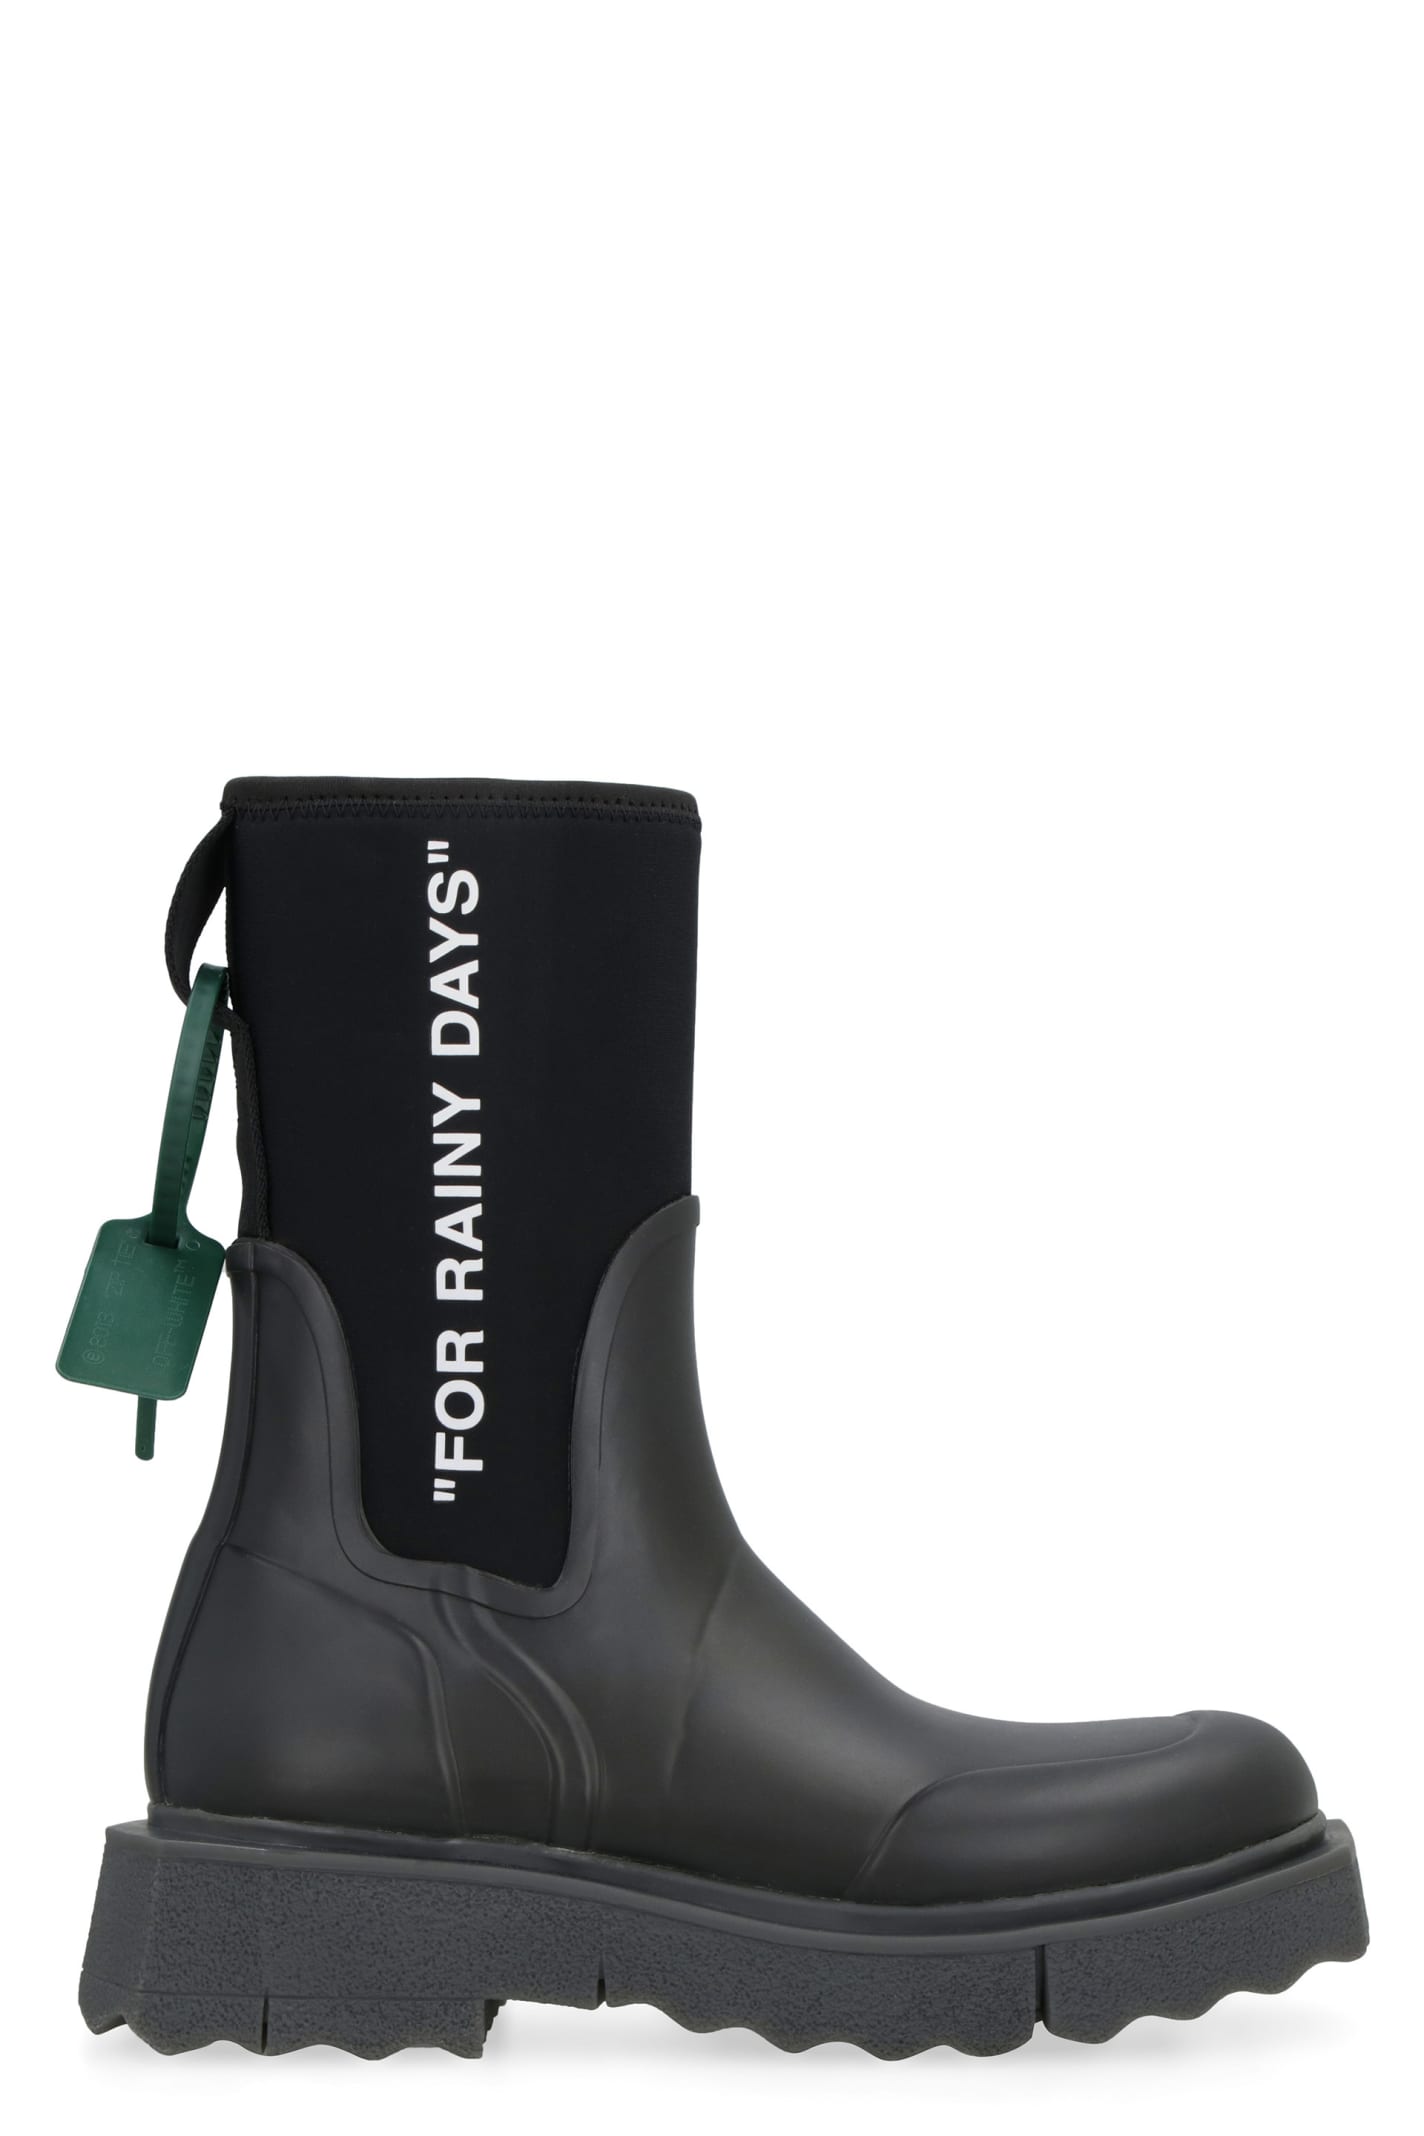 OFF-WHITE SPONGE WEDGE ANKLE BOOTS